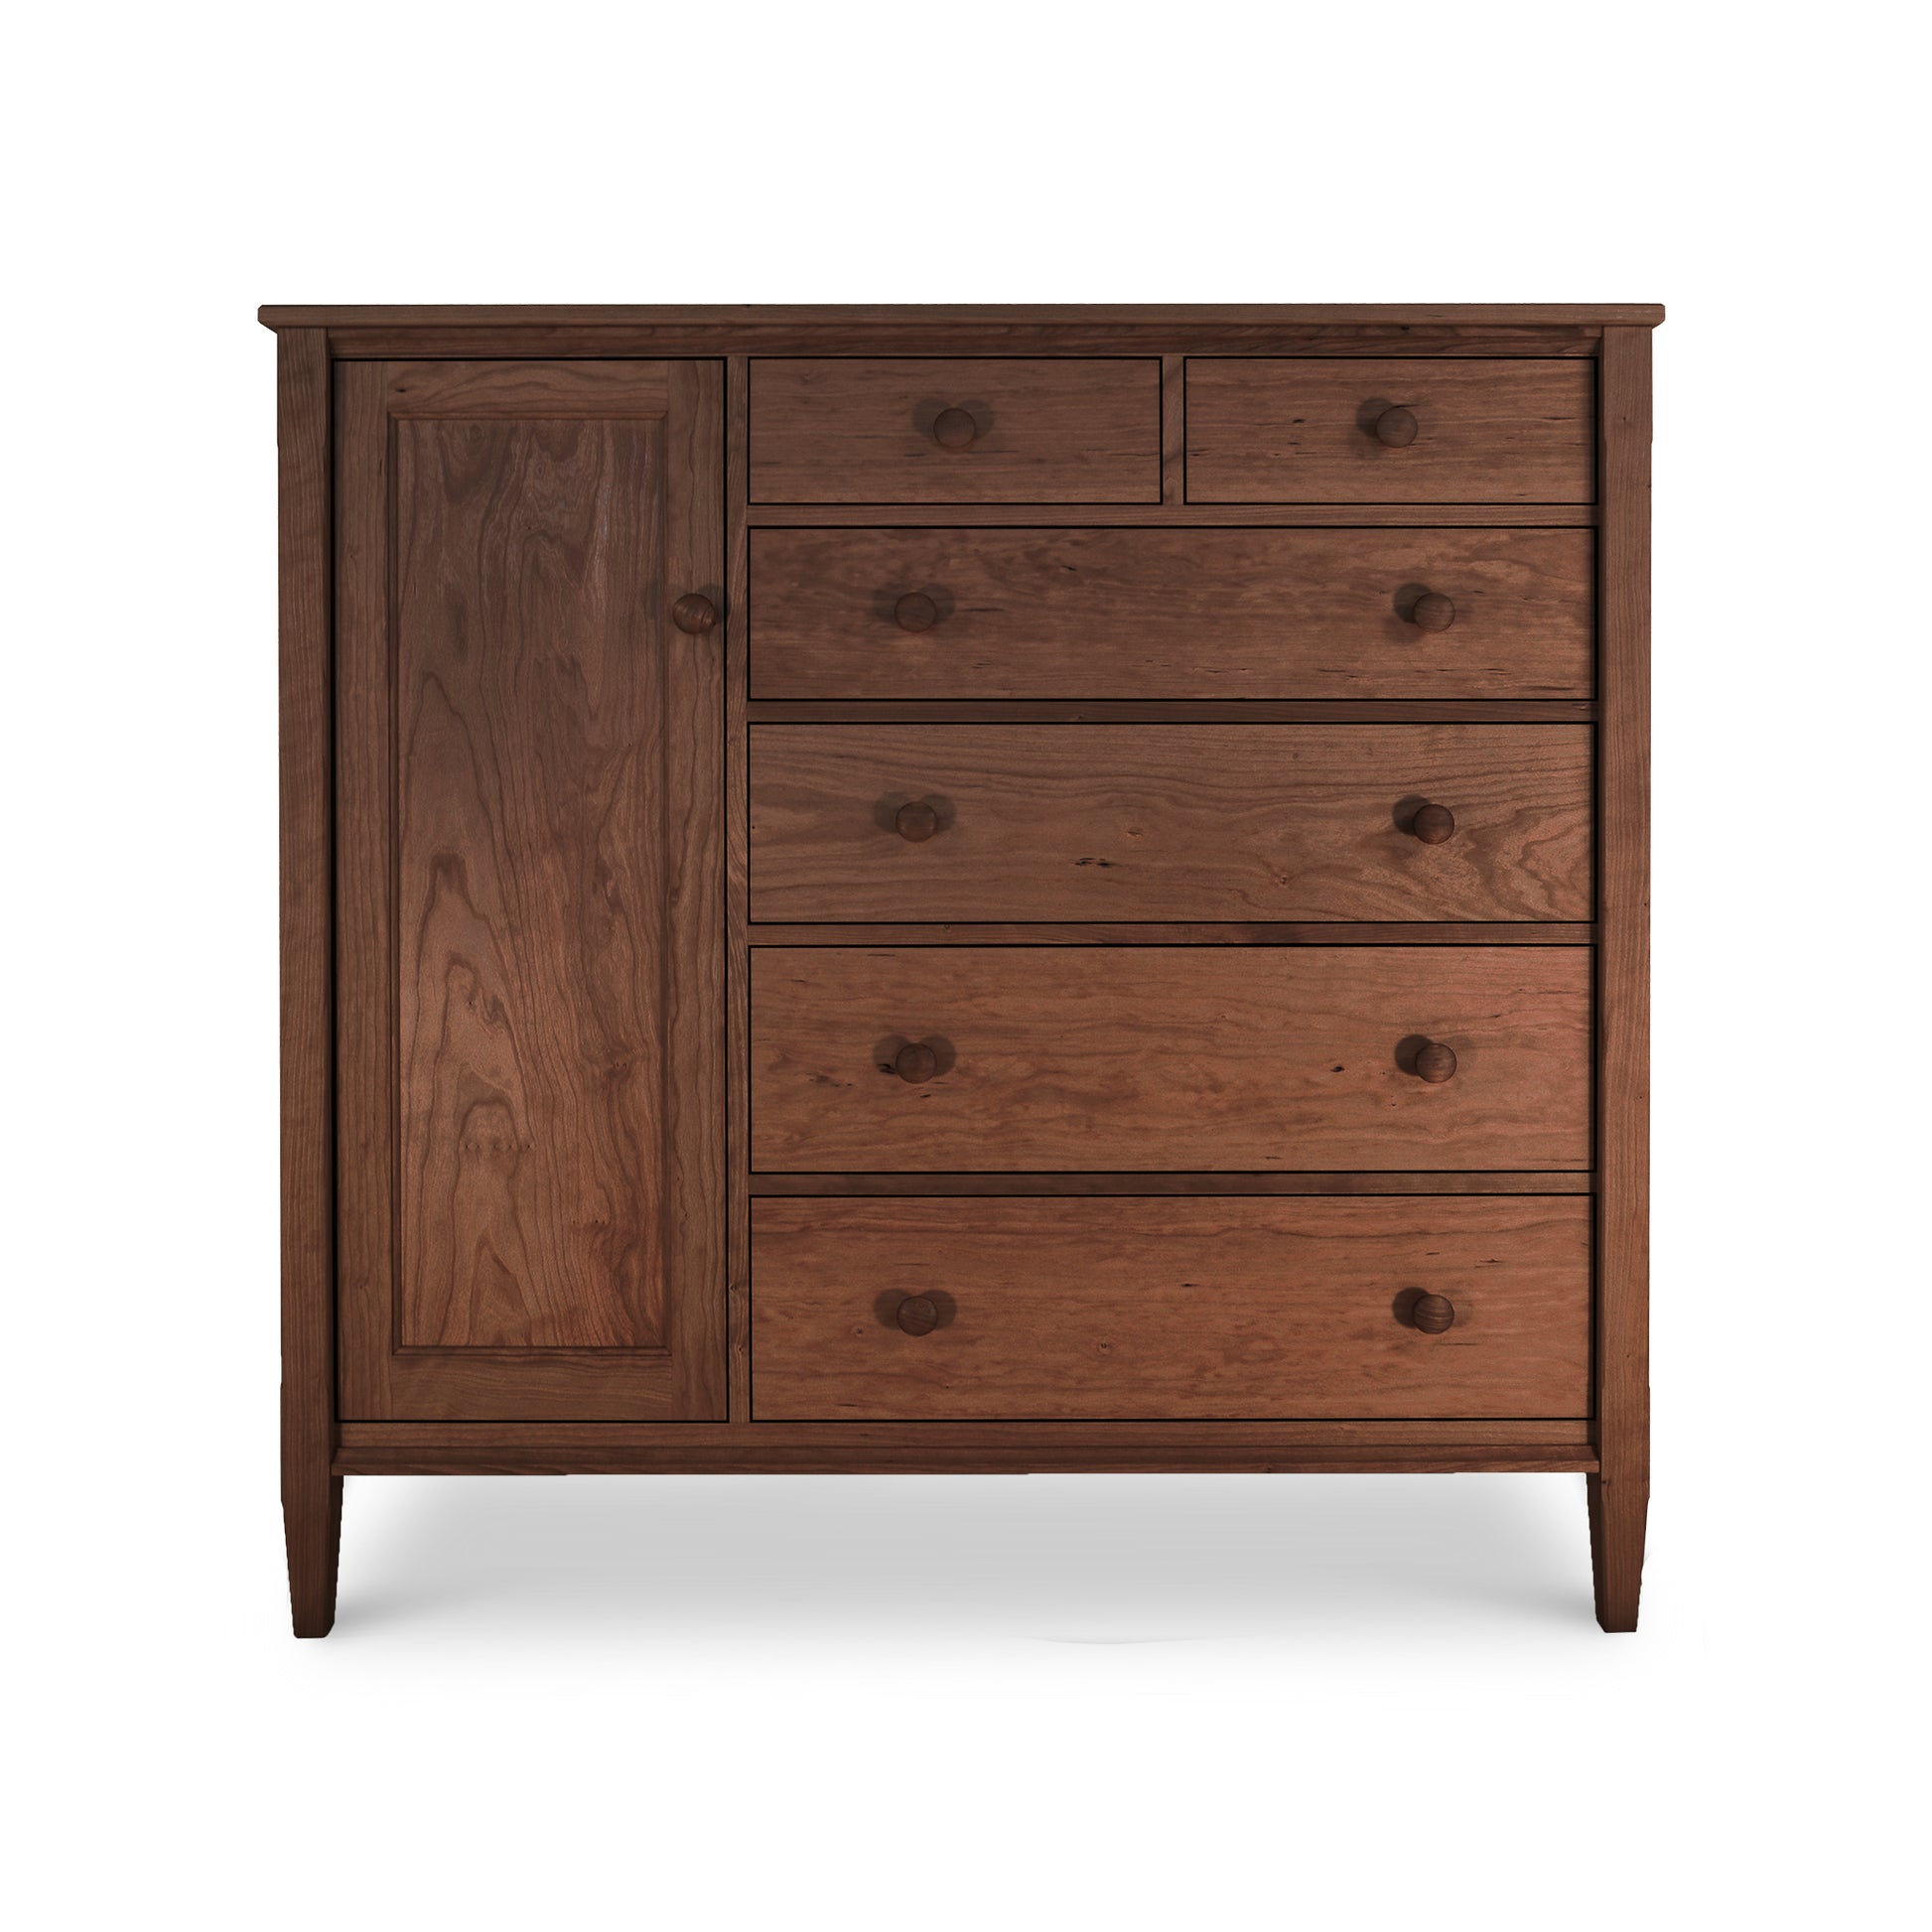 A Maple Corner Woodworks Vermont Shaker Gent's Chest featuring a large cabinet door on the left and six drawers of varying sizes on the right, set against a plain white background.